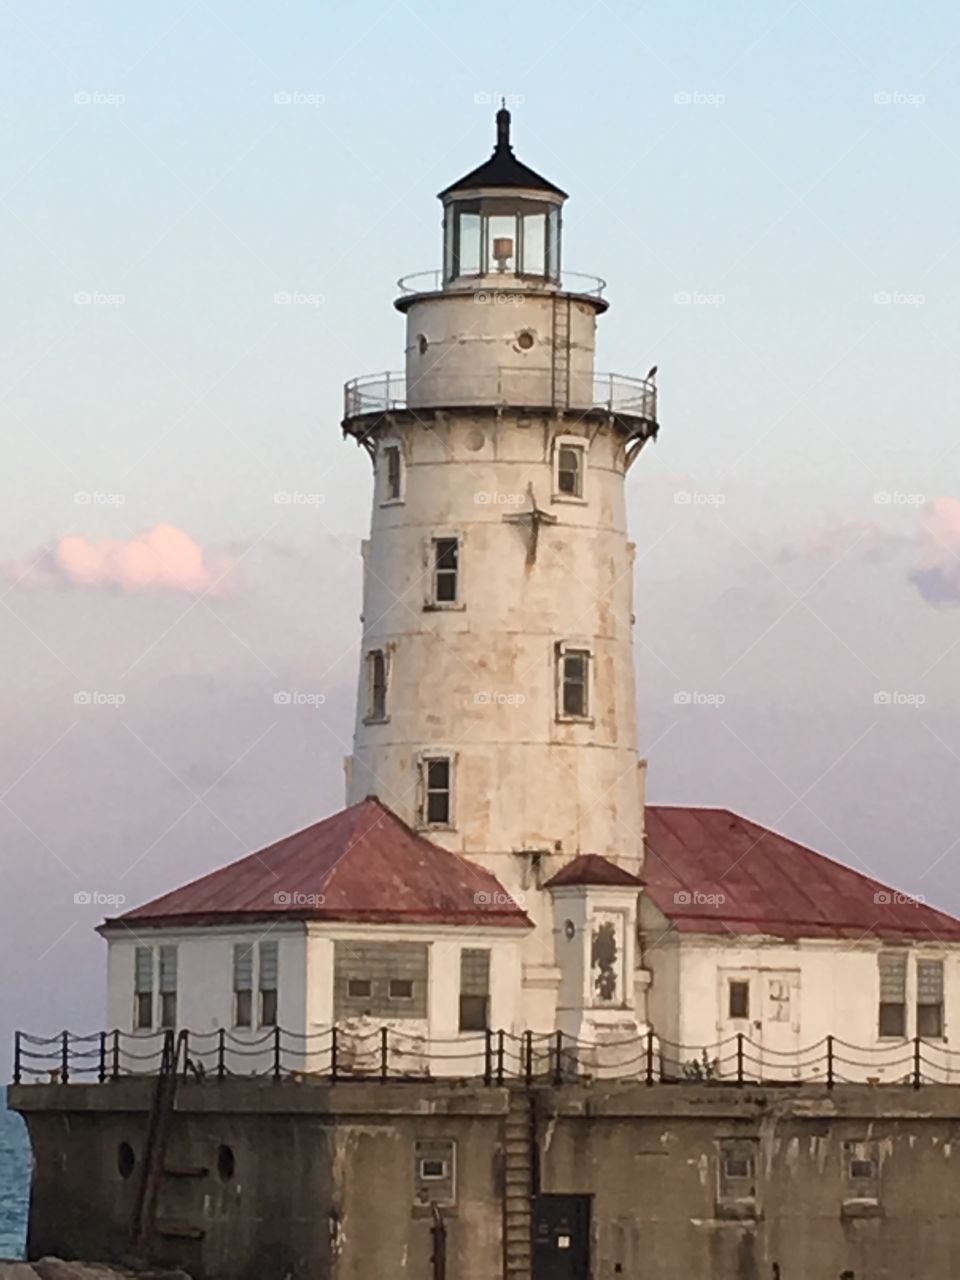 beautiful picturesque lighthouse just outside chicago late summer evening 